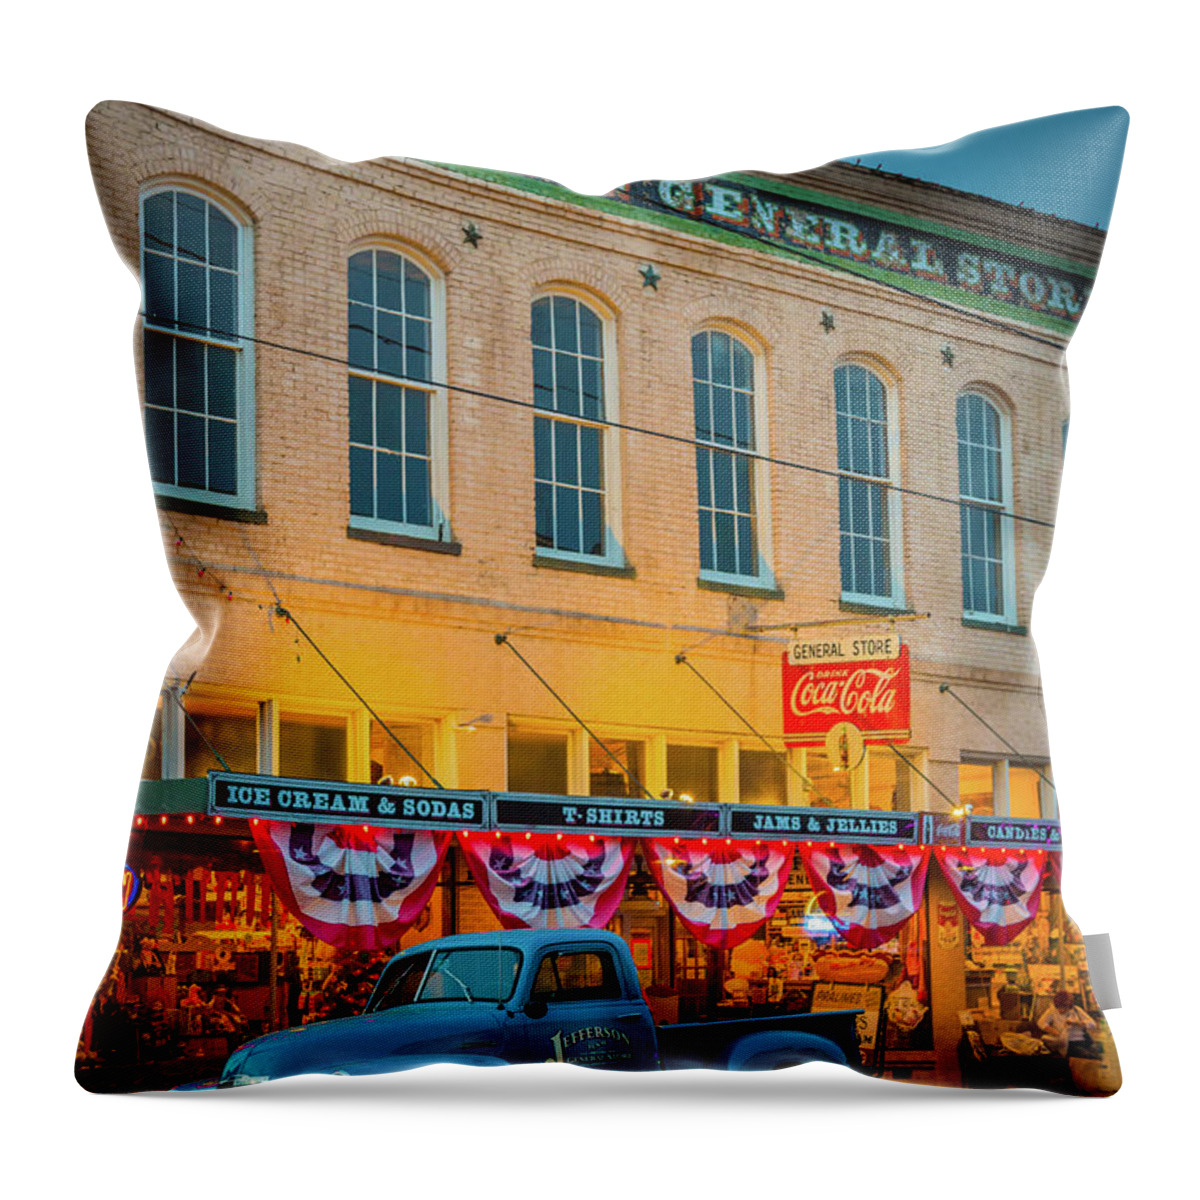 America Throw Pillow featuring the photograph Jefferson General Store by Inge Johnsson